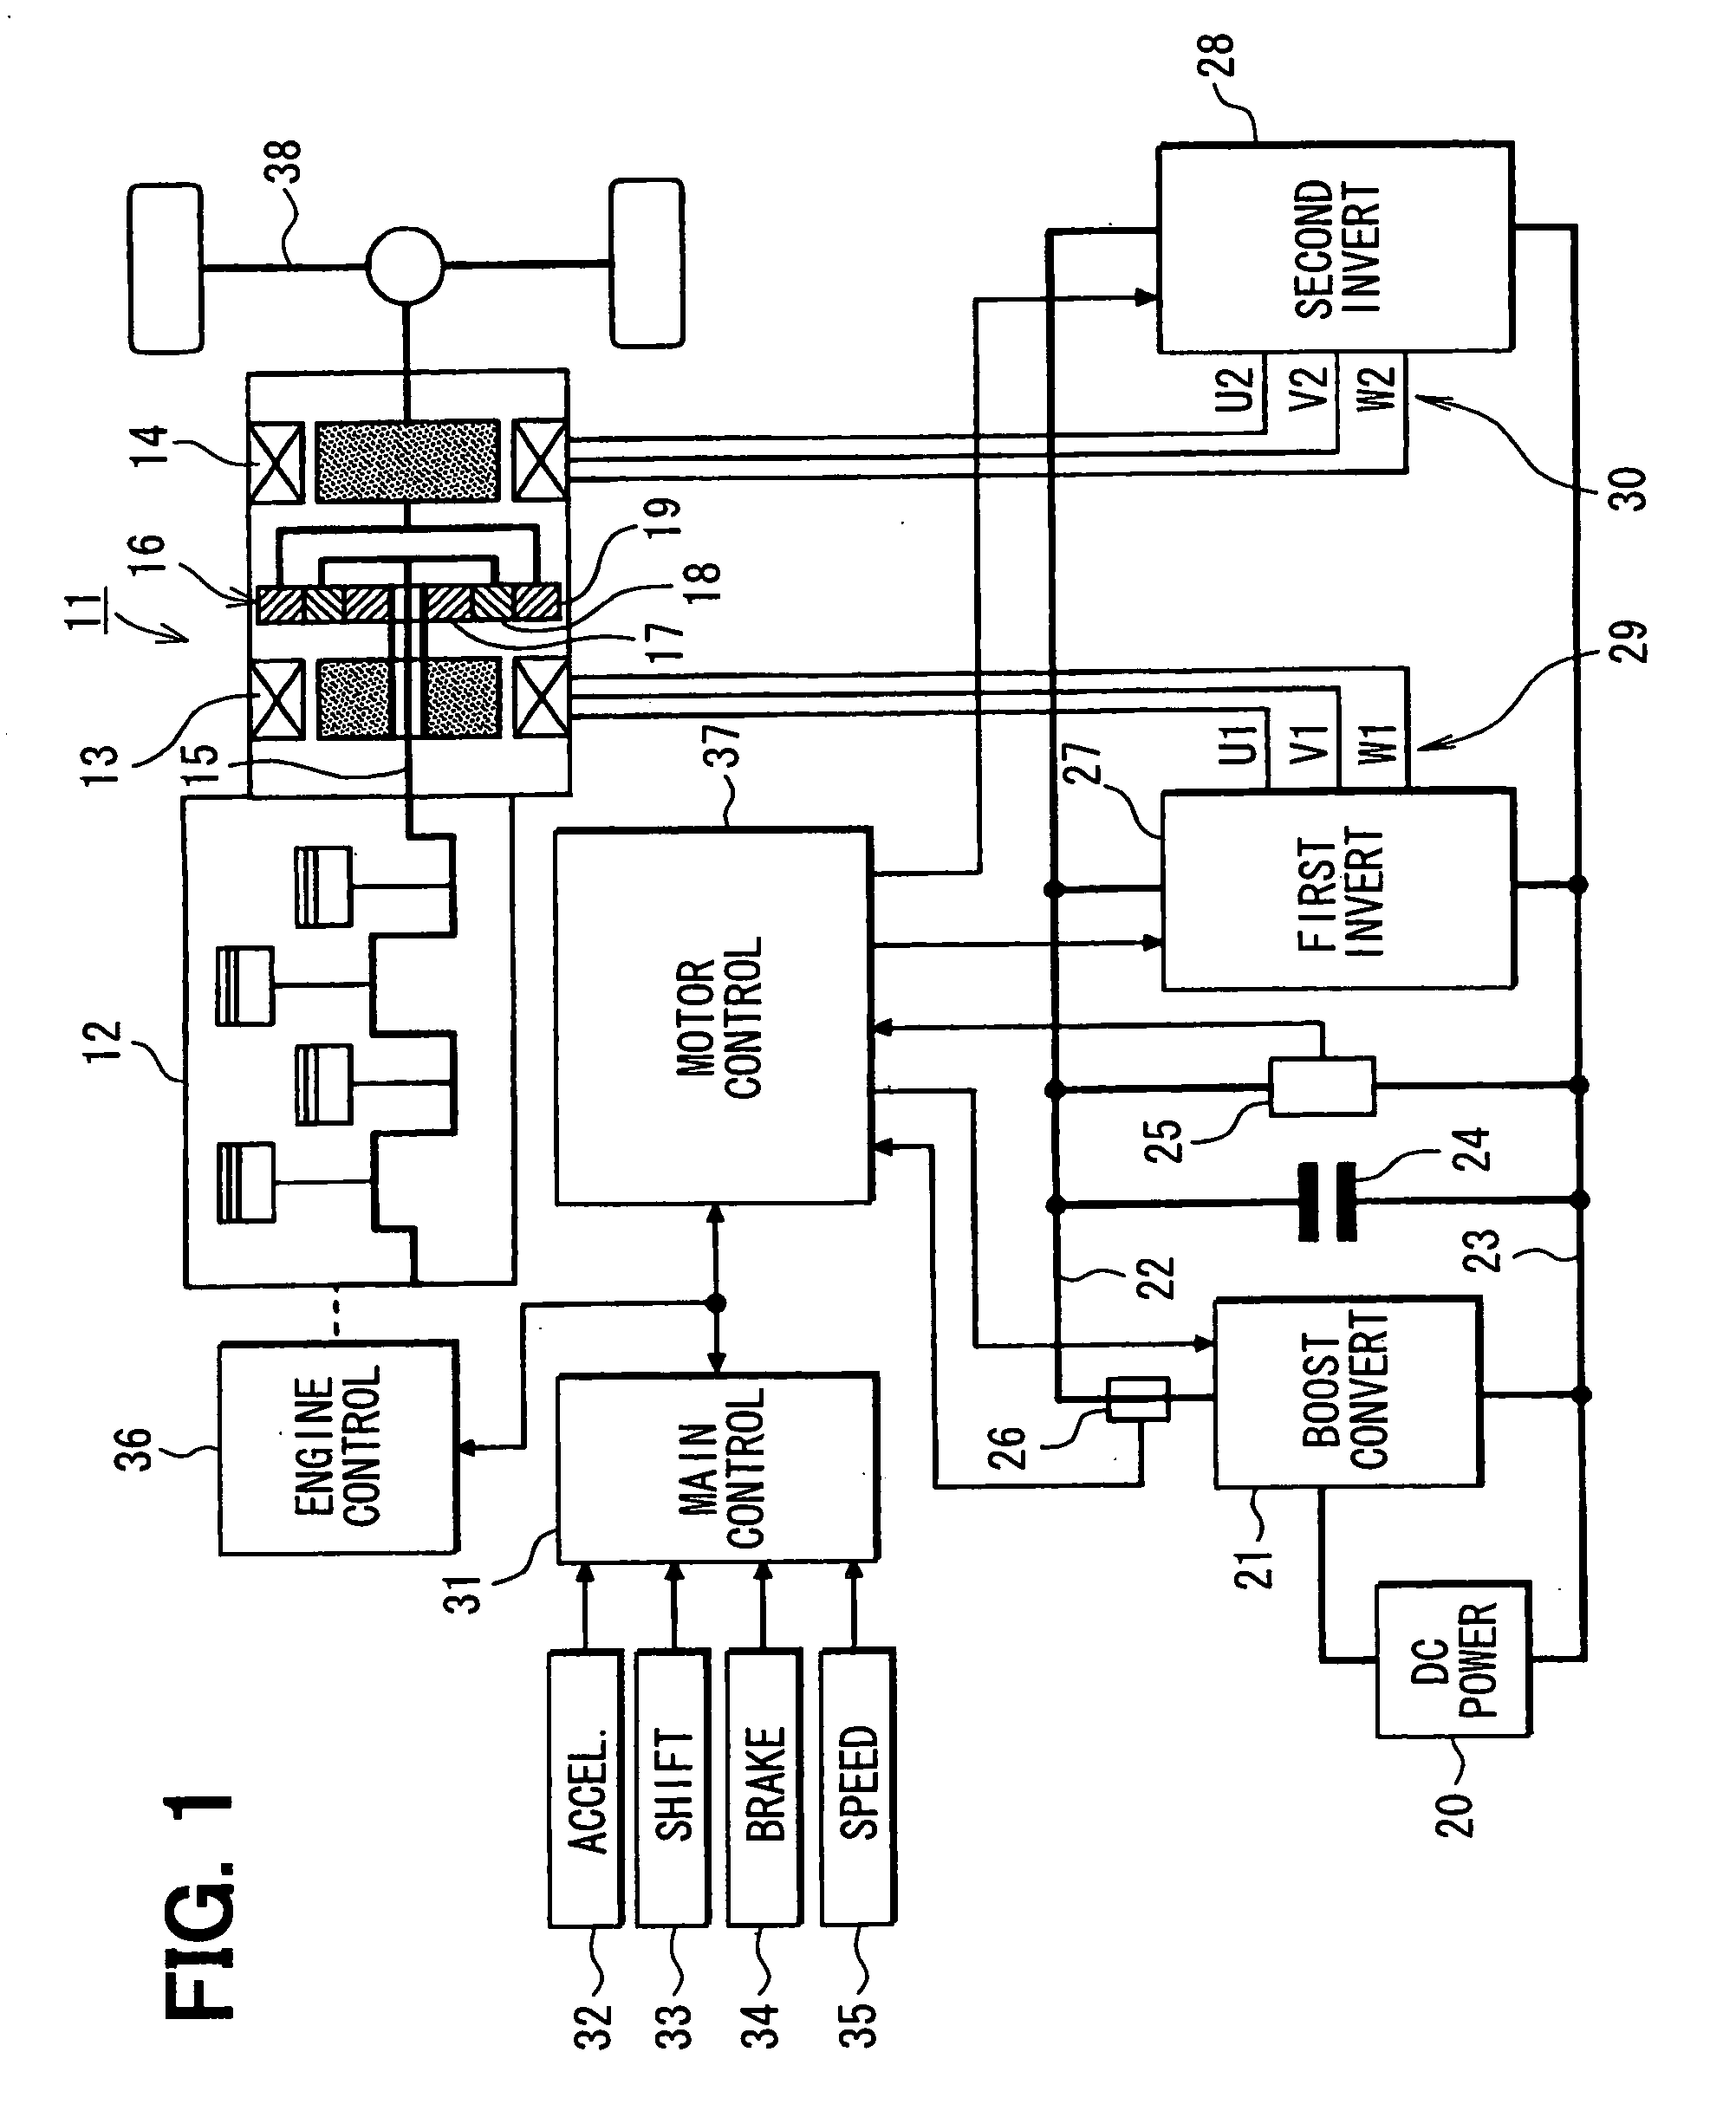 Control apparatus for electric vehicles